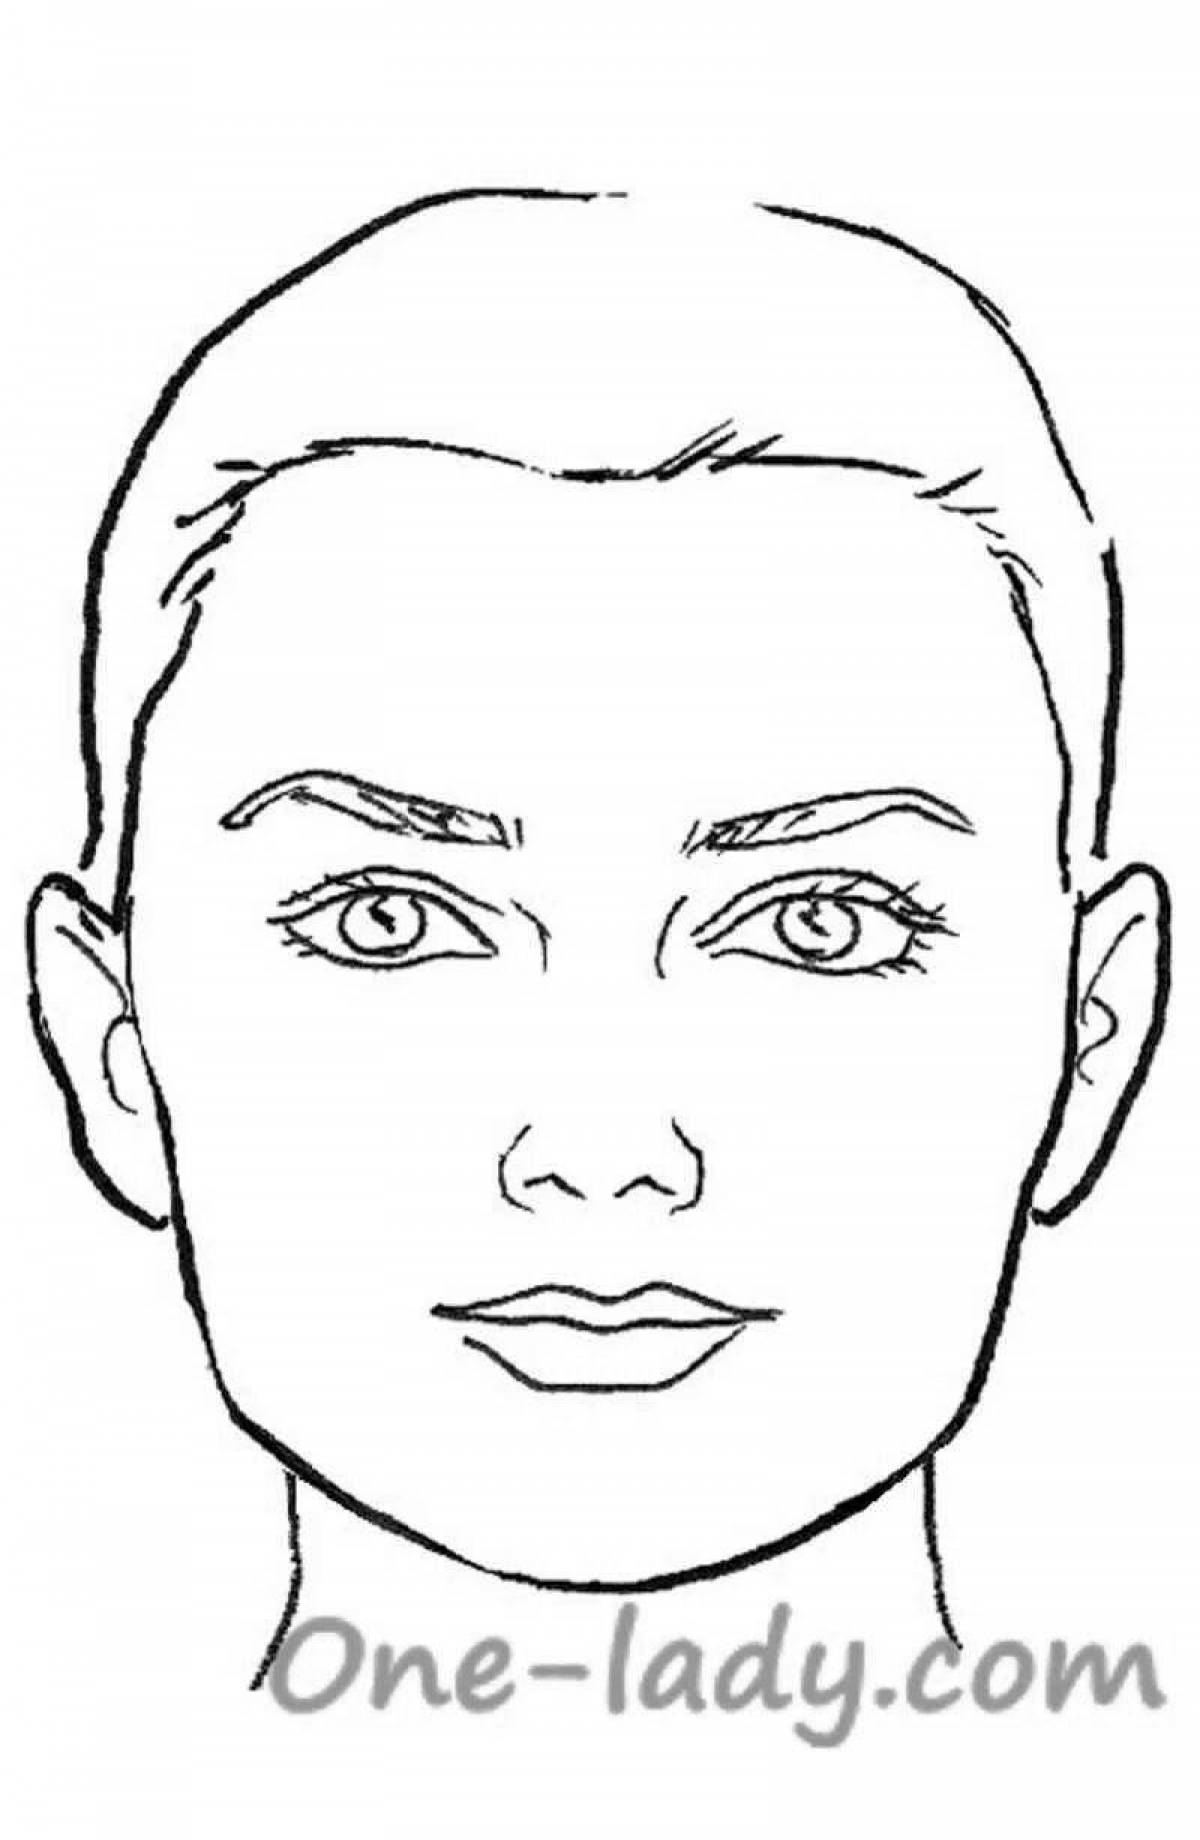 Coloring page with human faces